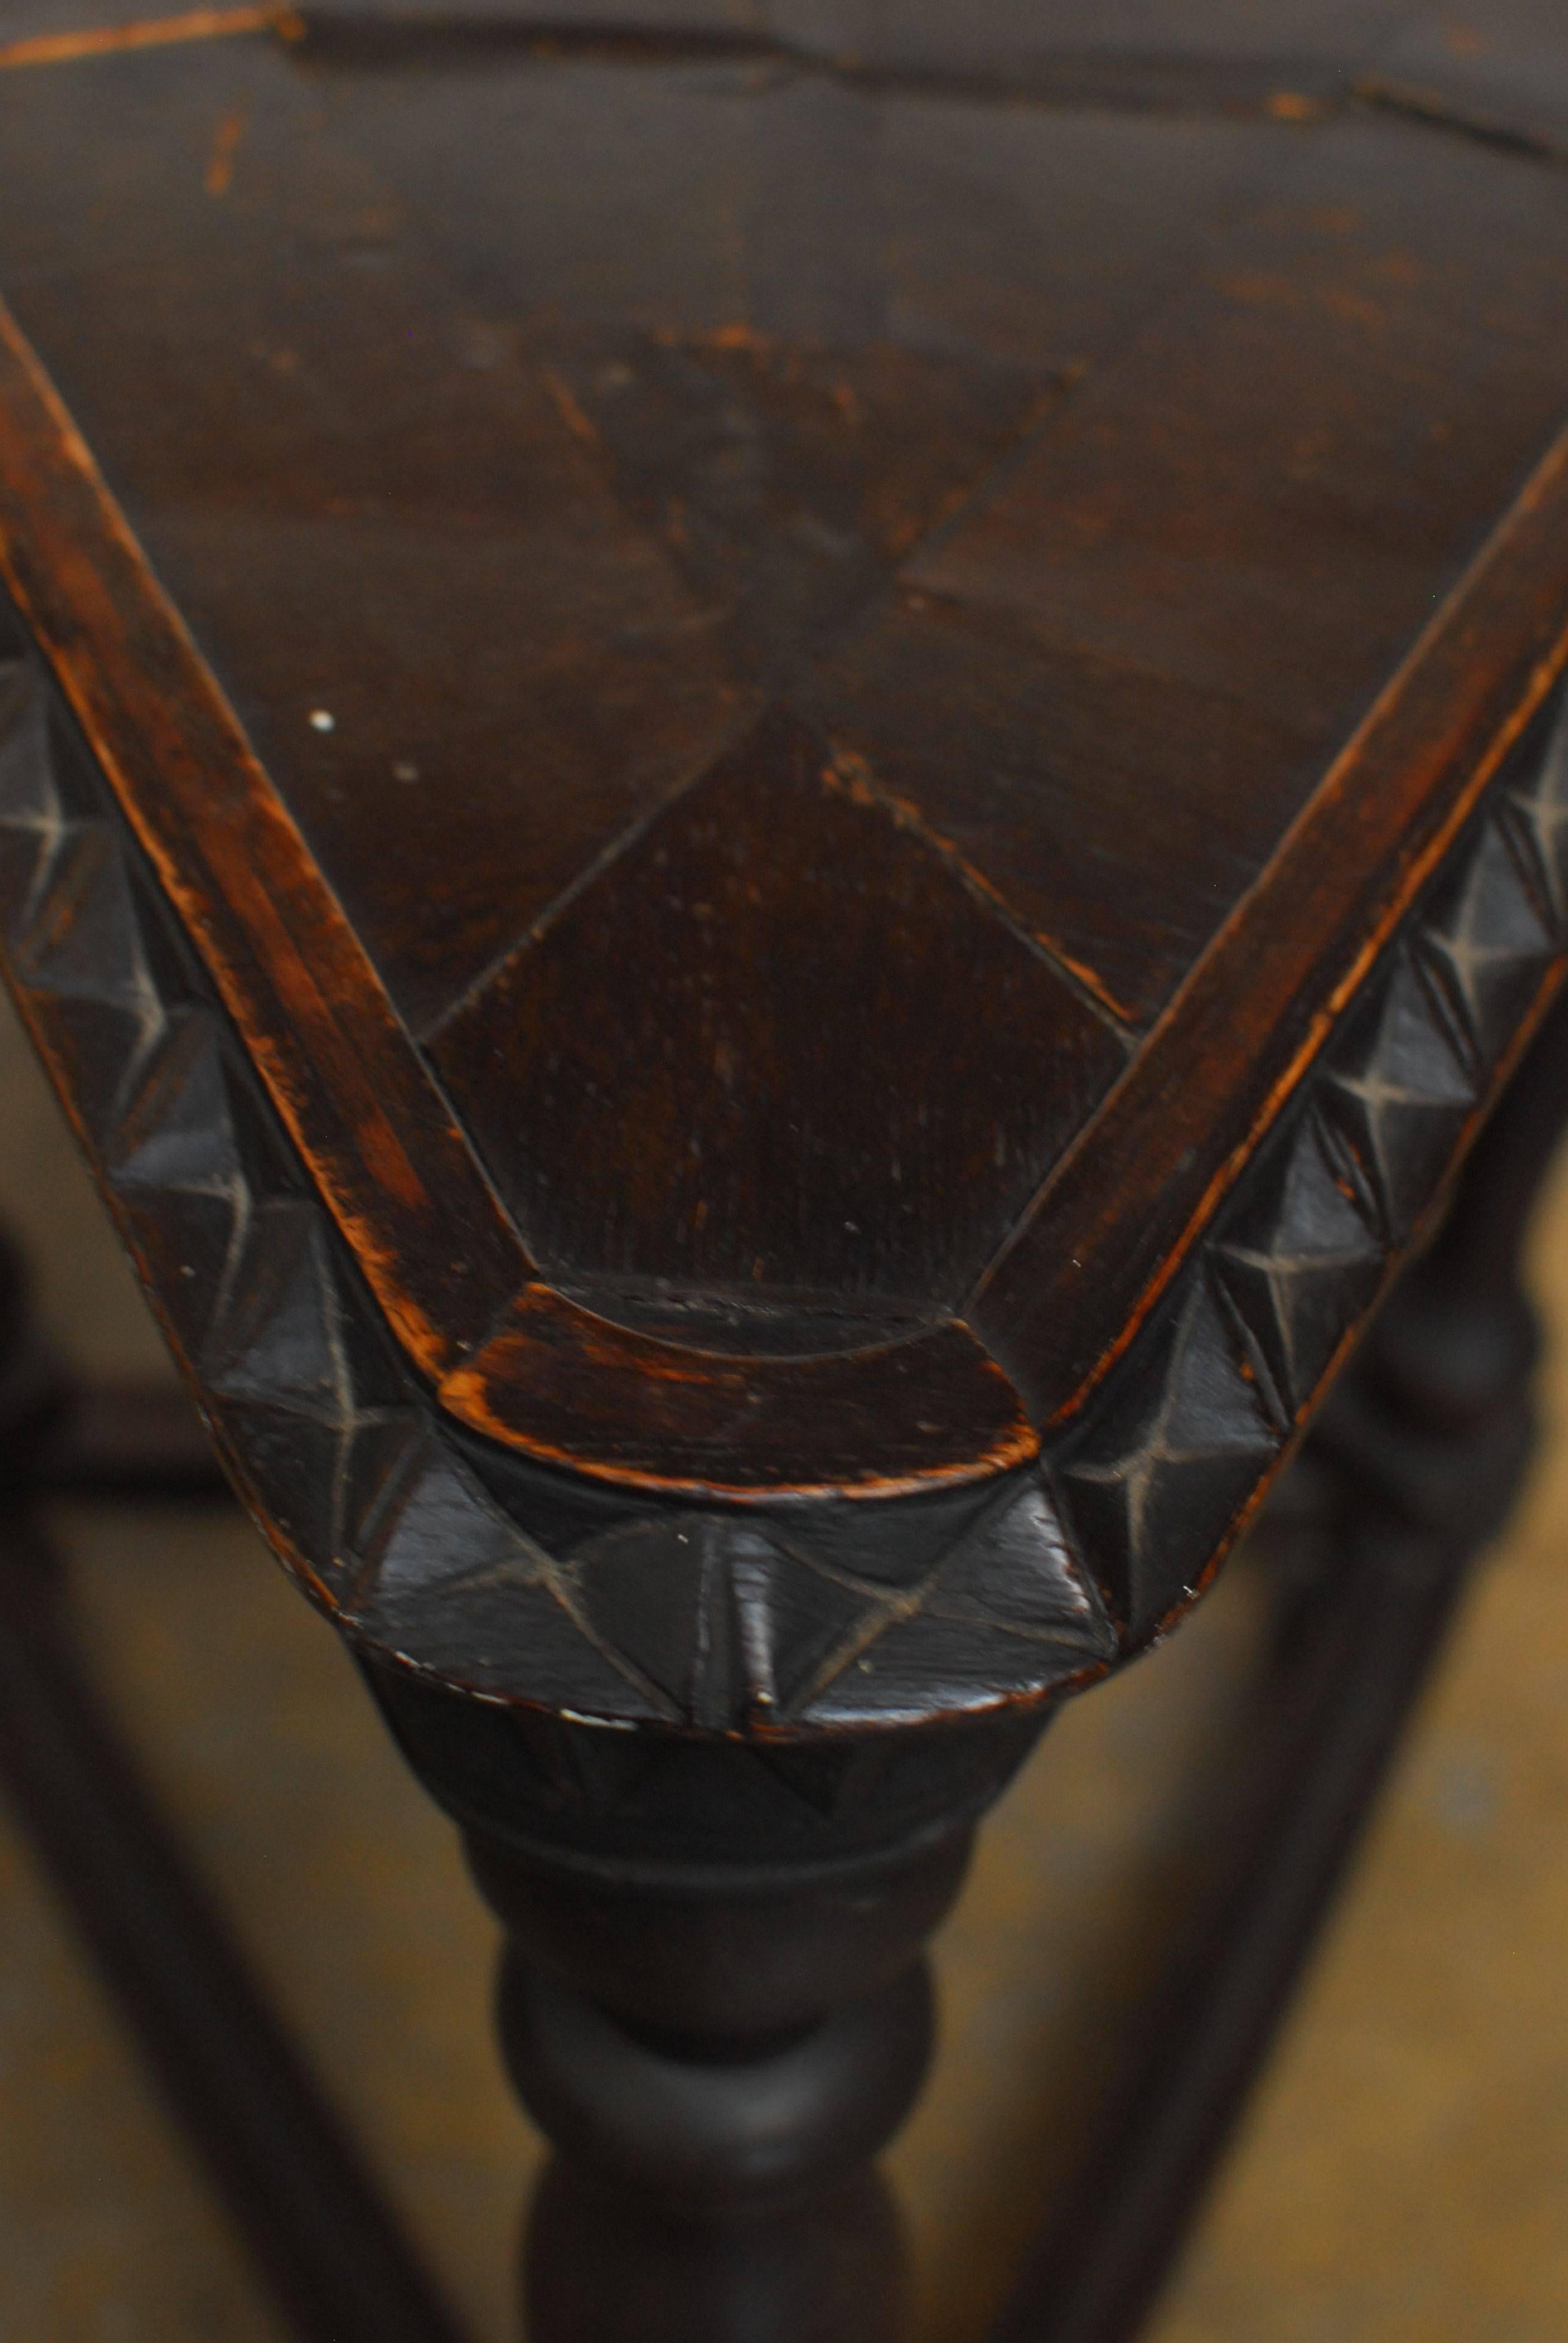 American Triangular Table with a Heart-Shaped Top